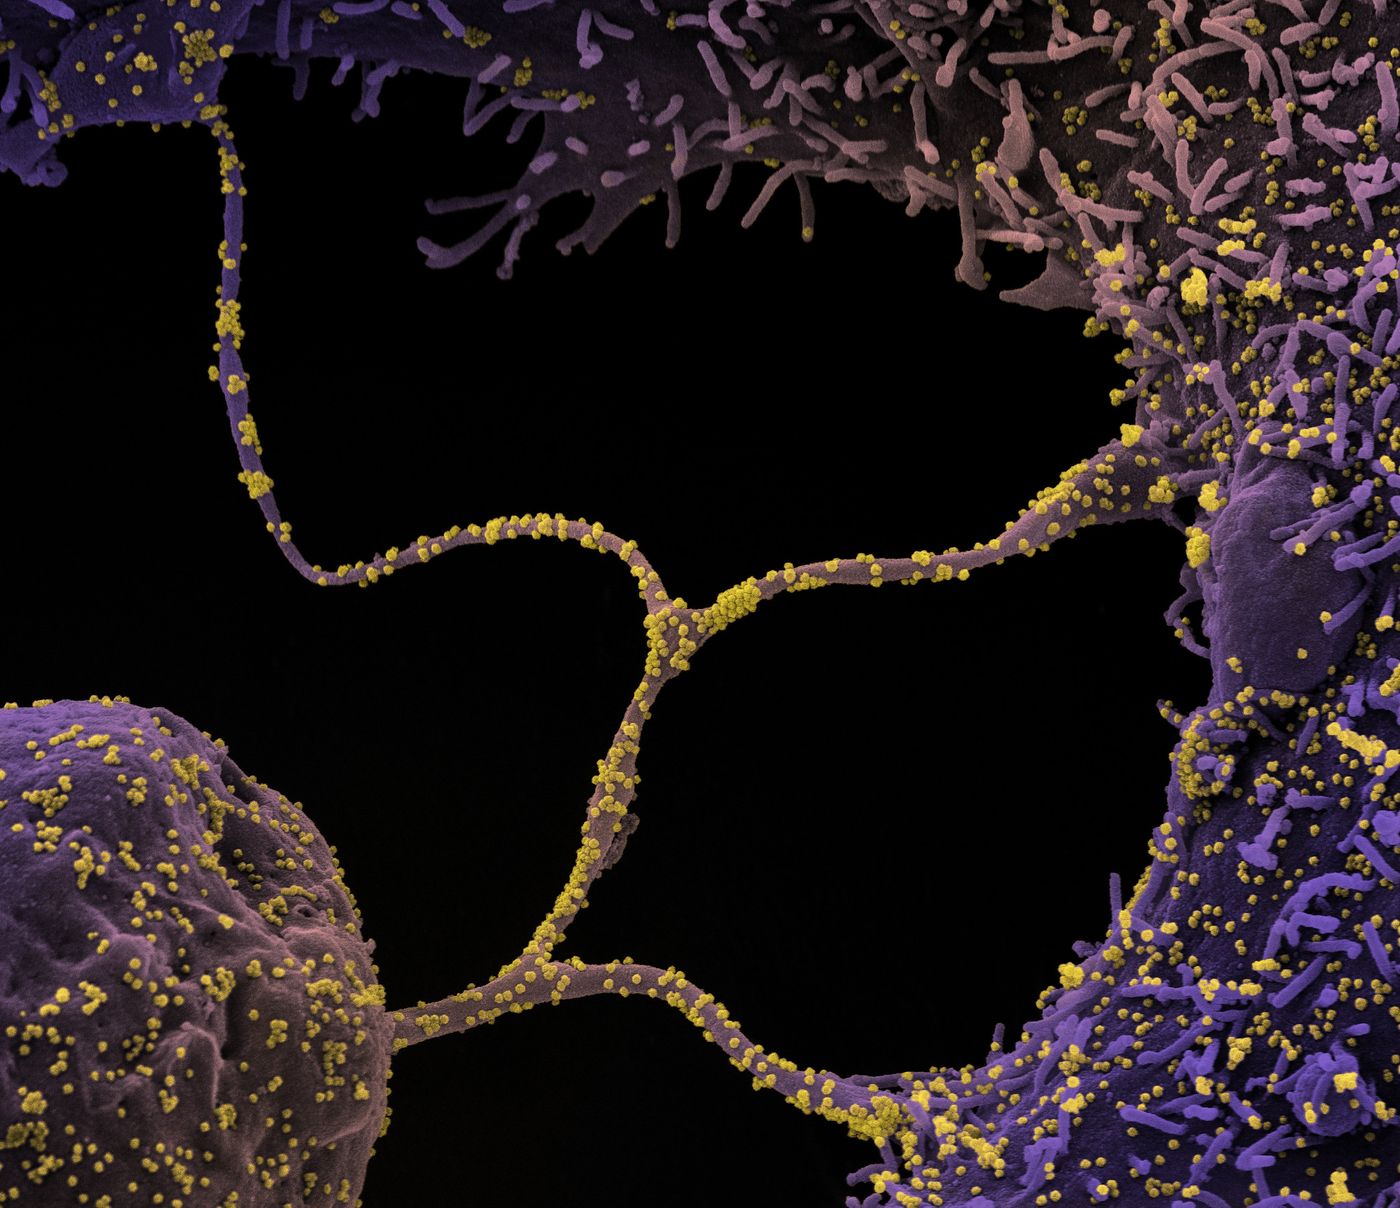 Colorized scanning electron micrograph of CCL-81 cells (purple) infected with SARS-CoV-2 virus particles (yellow) from a patient sample. The cell protrusions are filapodia; they extend from infected cells, attach to neighbors, and transport infectious virus particles. Credit: NIAID Integrated Research Facility (IRF) in Fort Detrick, Maryland